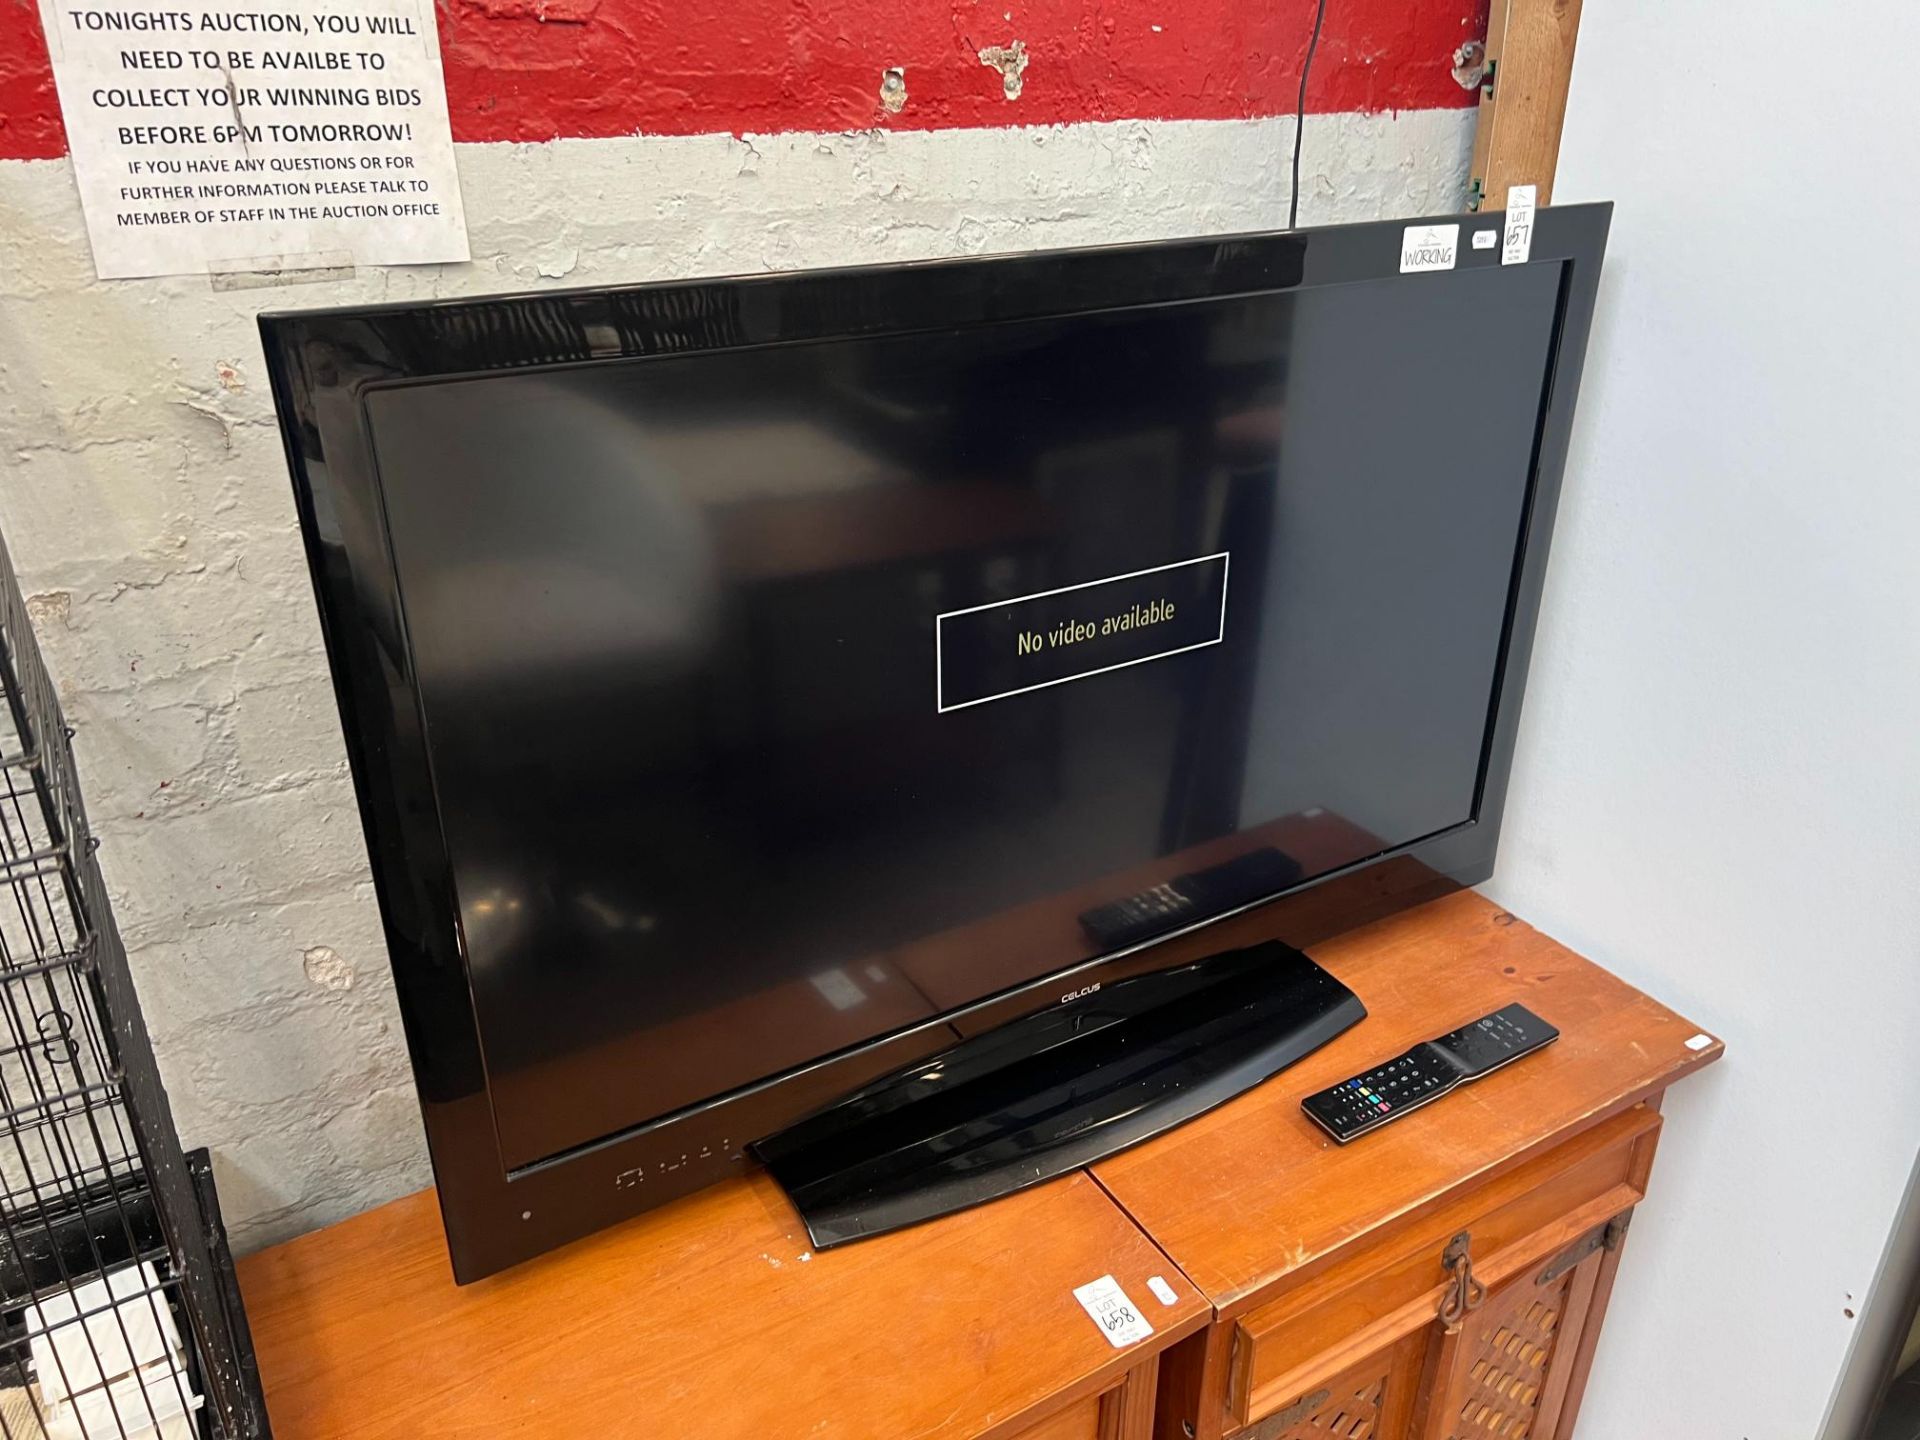 CELCUS 42" FLATSCREEN TV WITH REMOTE (WORKING)